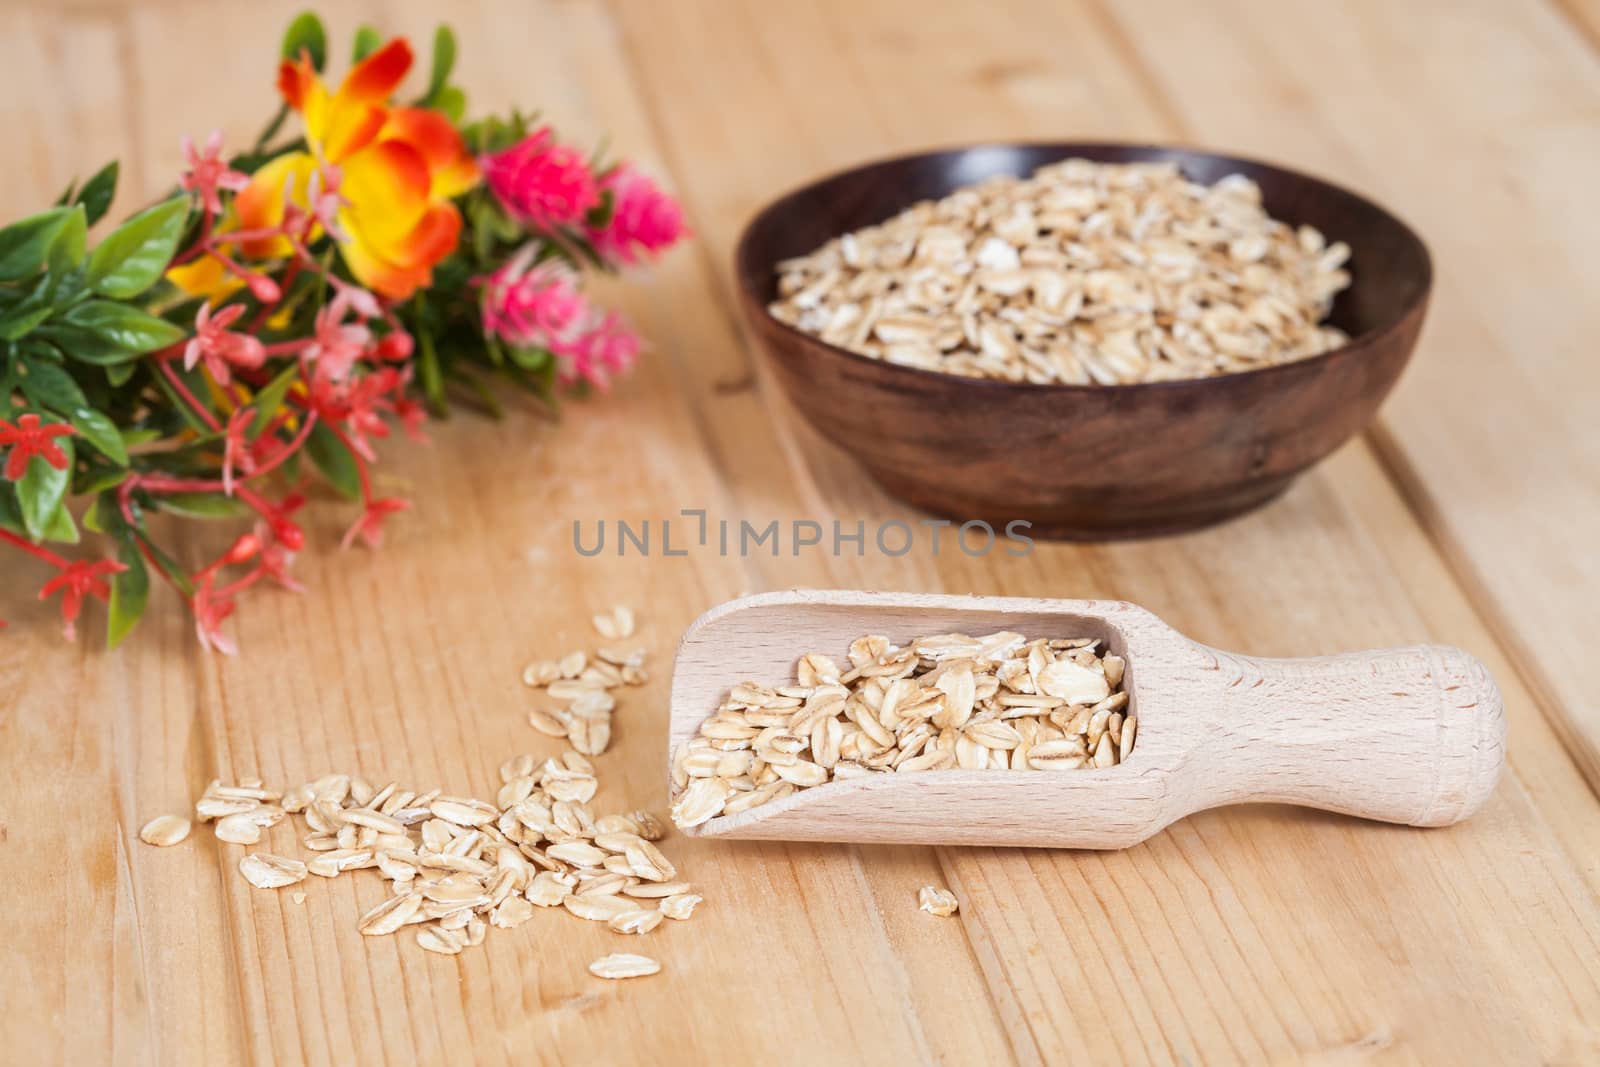 wood spoon with oats flakes pile on wood  by amnarj2006